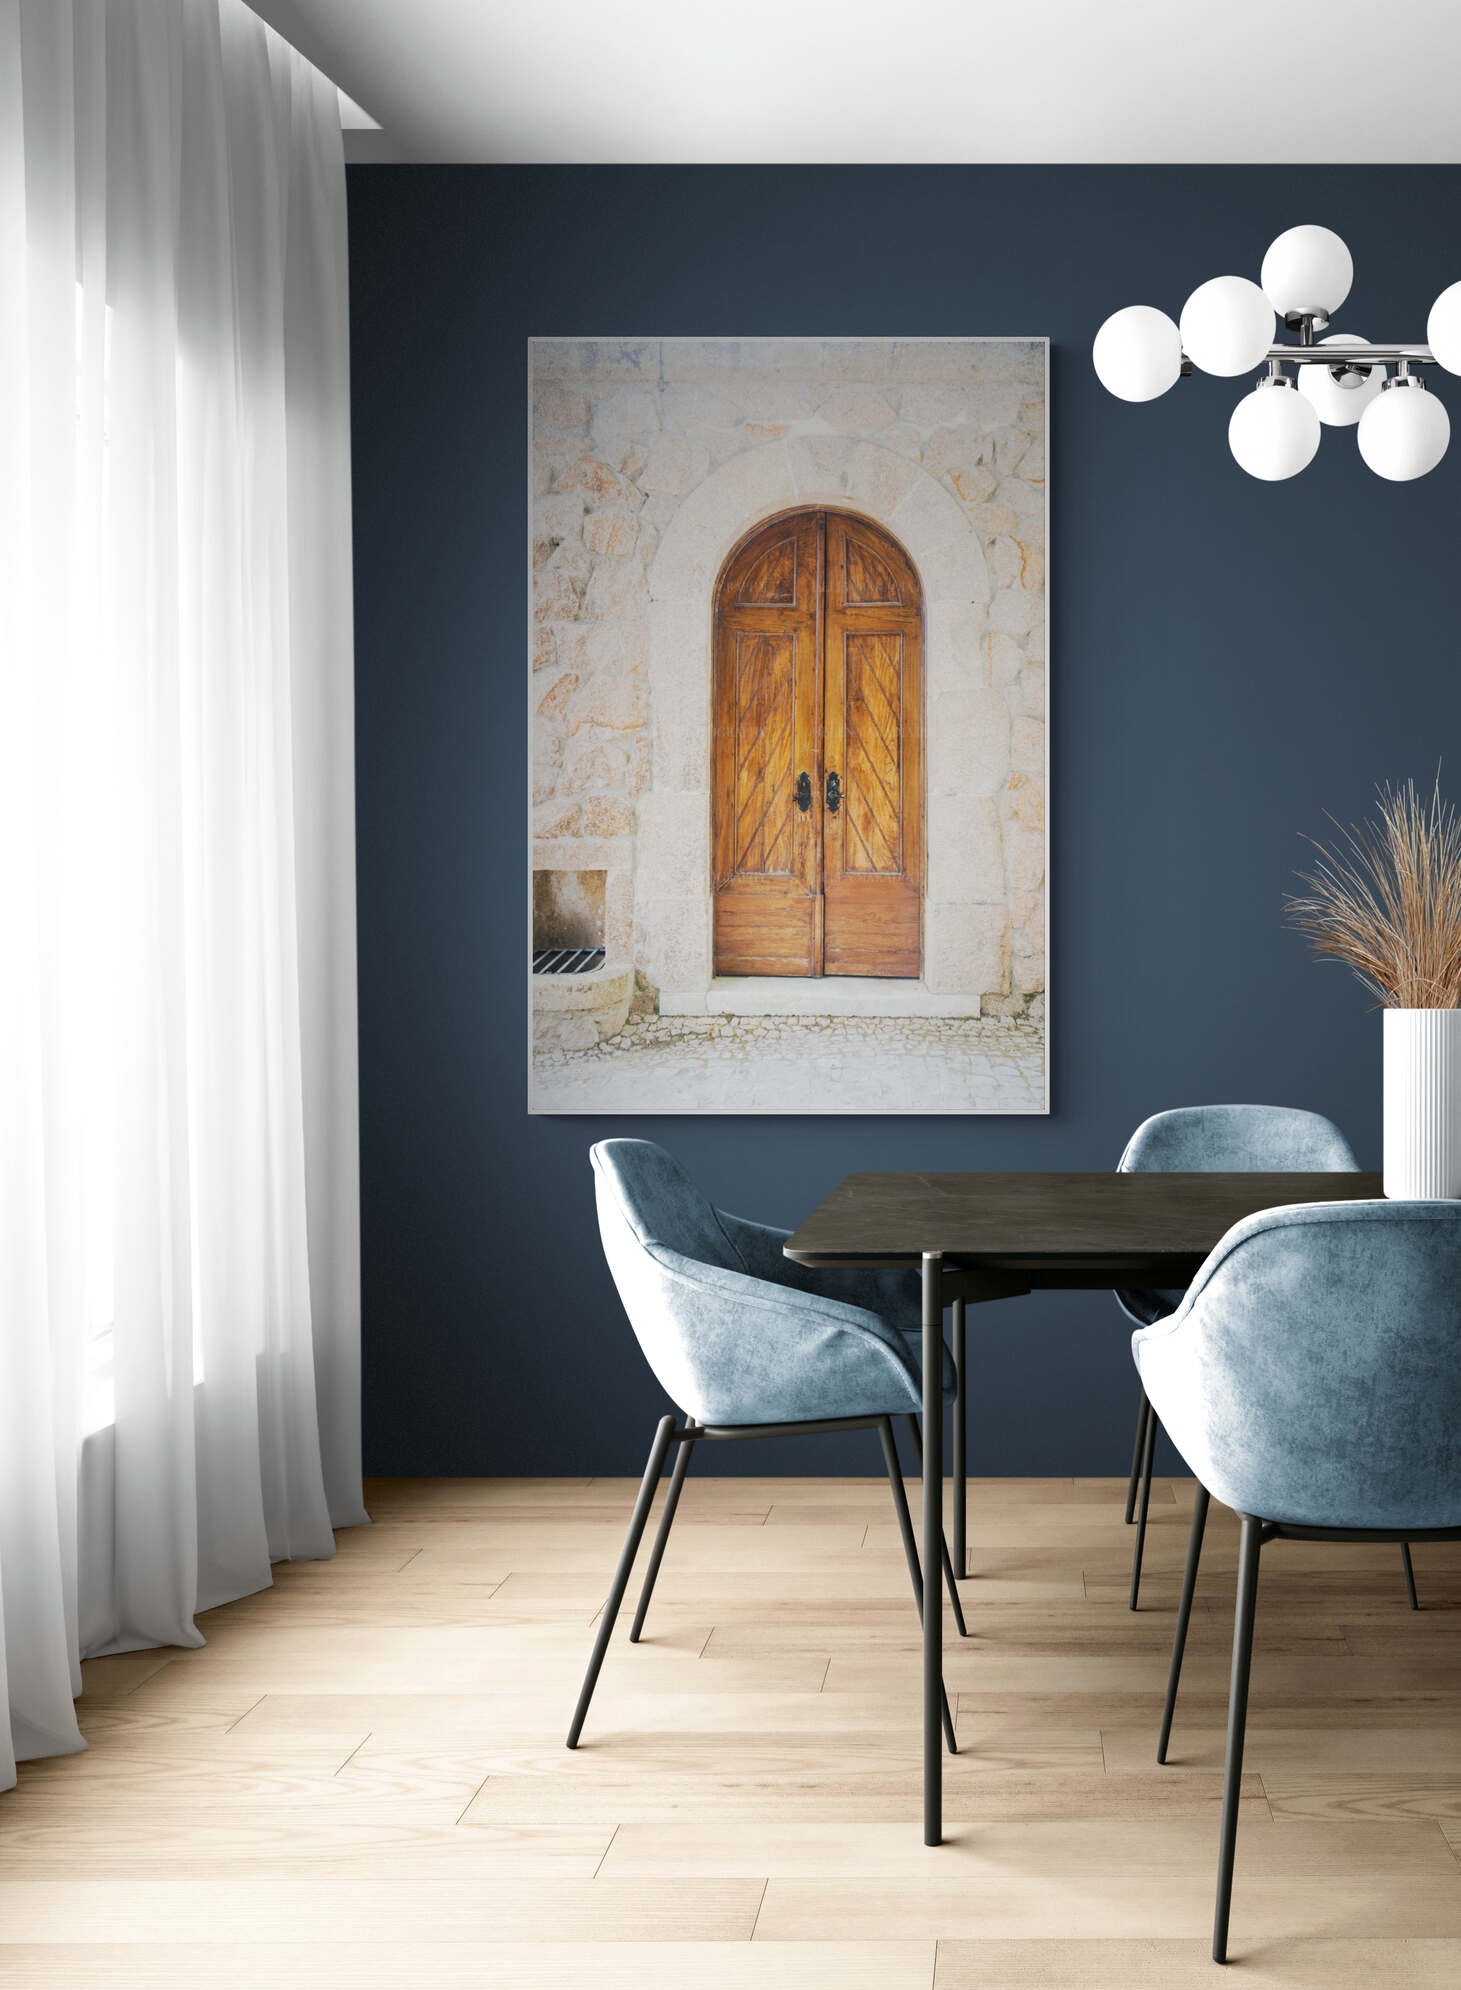 Arched wooden door photograph of sintra portugal as wall art in a dining room